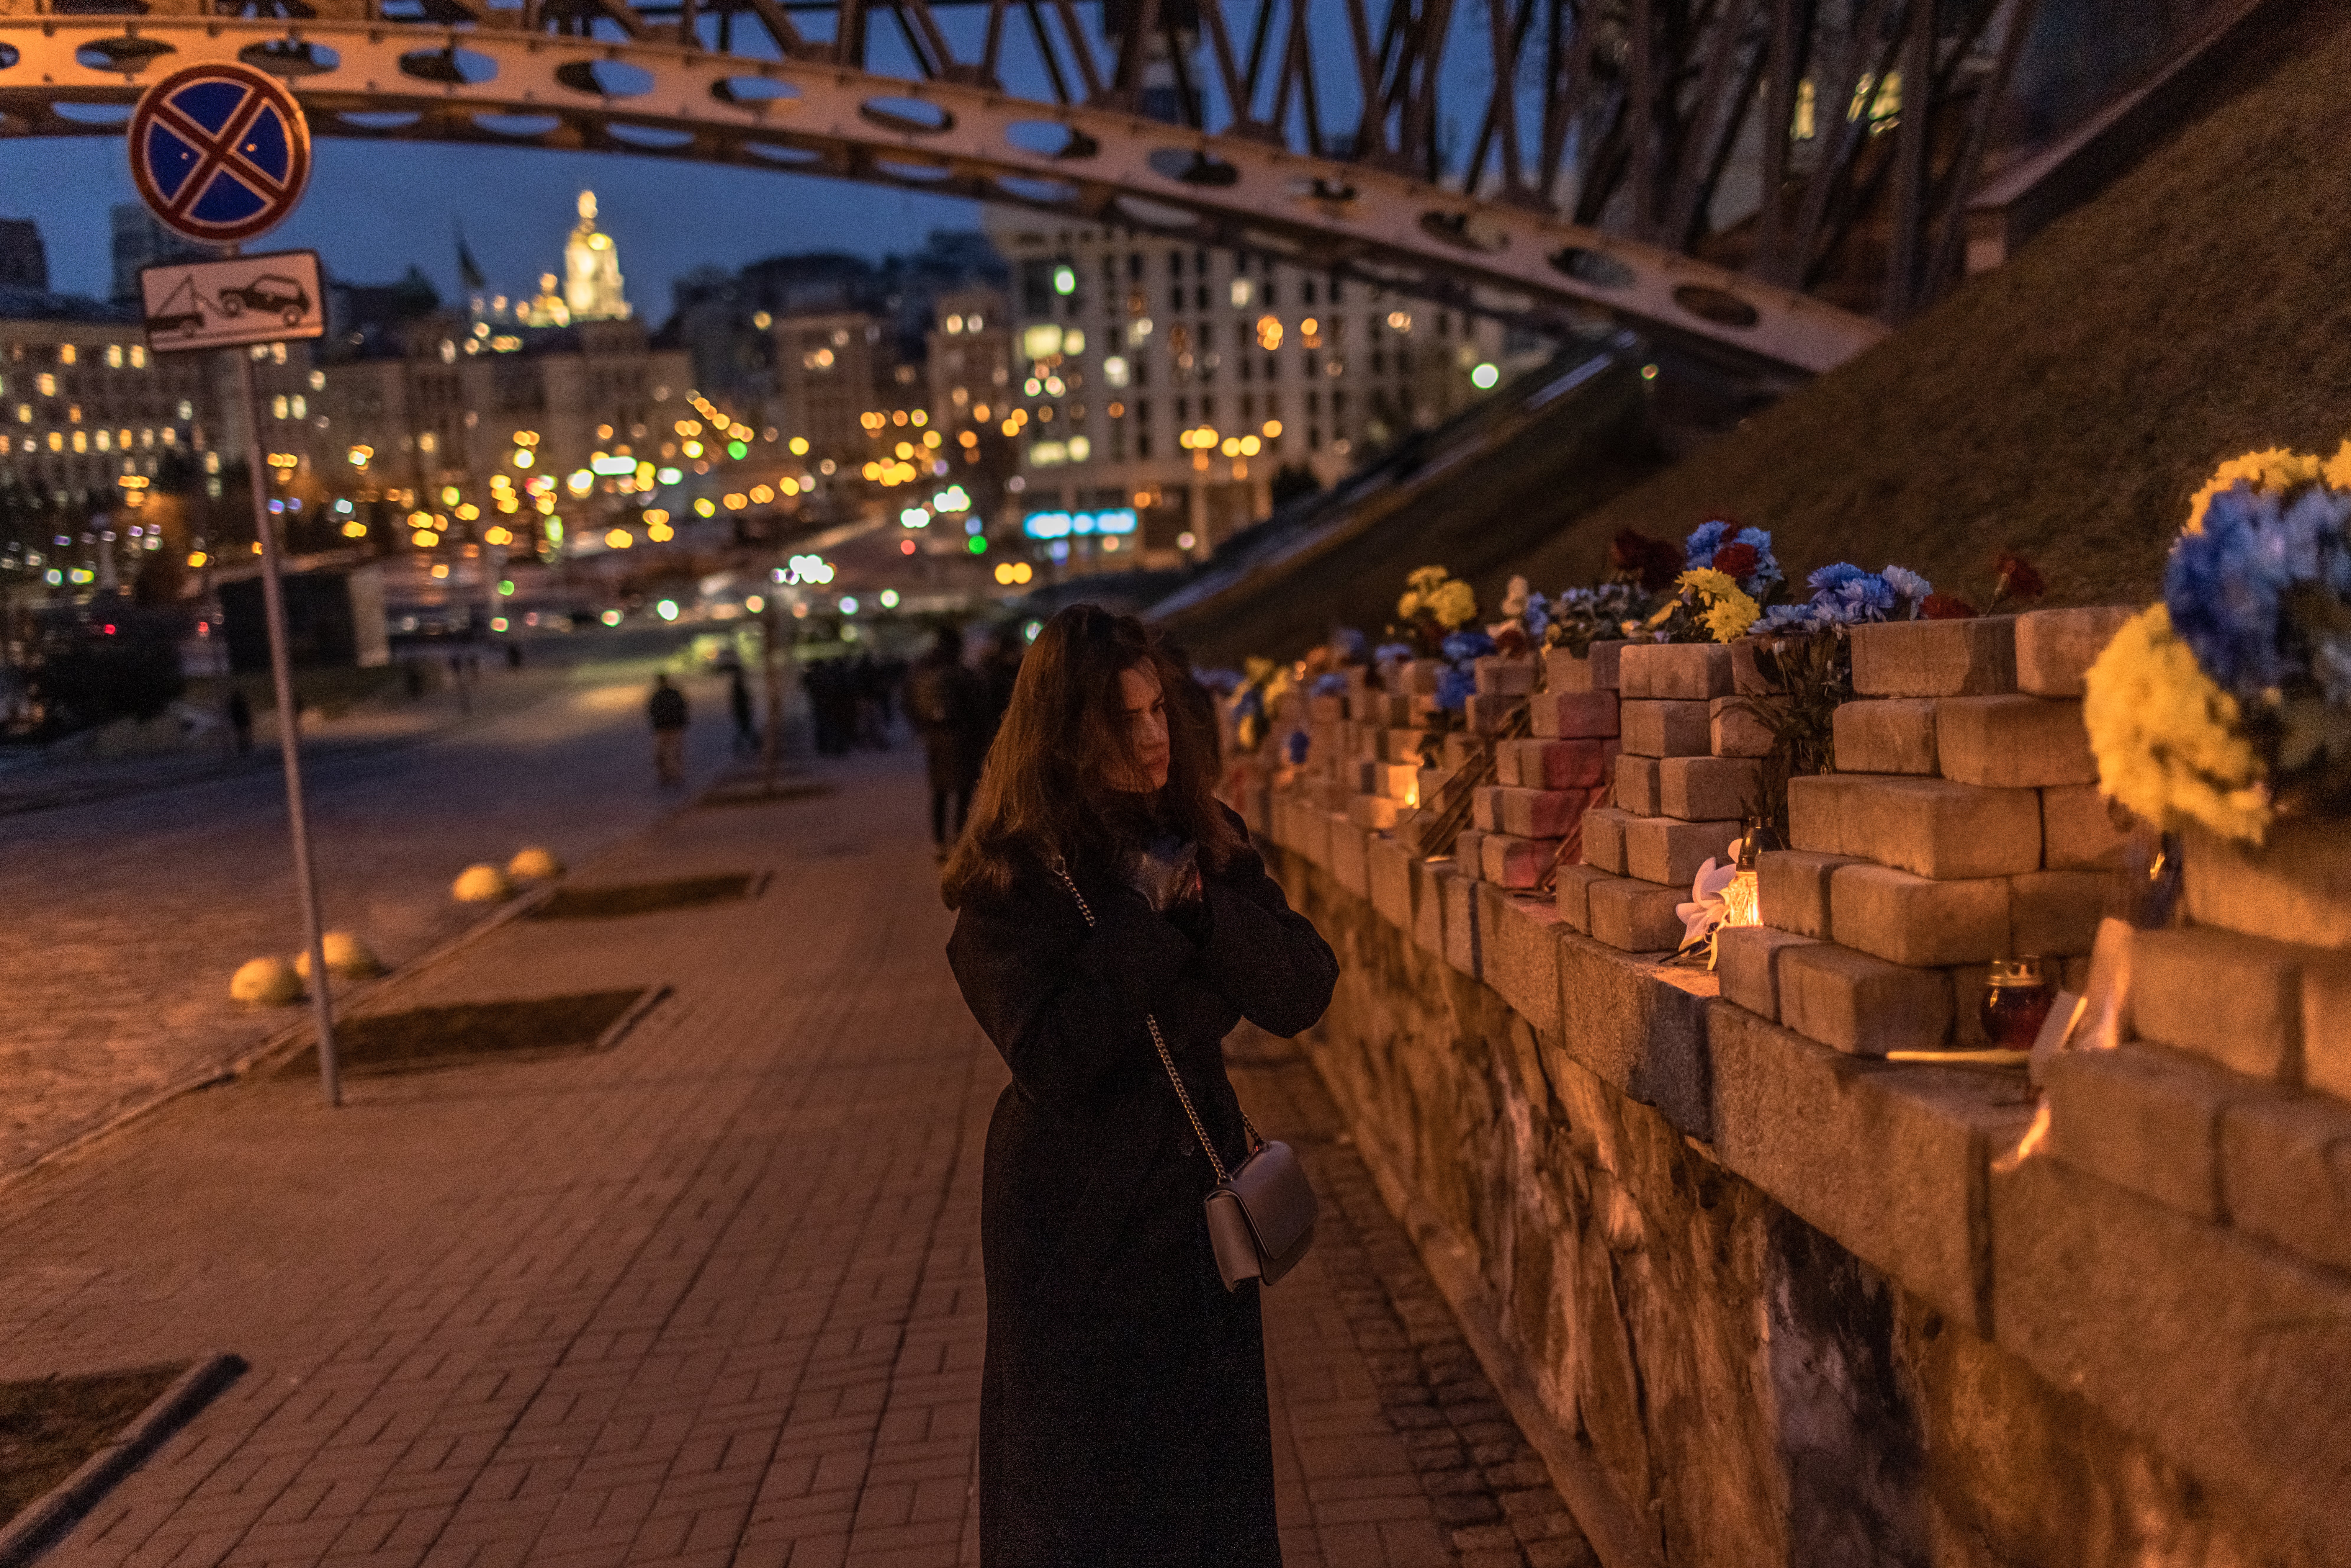 A woman visits the memorial to the Heavenly hundred heroes, who were killed in 2014 during the mass Euromaidan protests, on the Day of Remembrance of Heroes of Heavenly Hundred, on February 20, 2023 in Kyiv, Ukraine